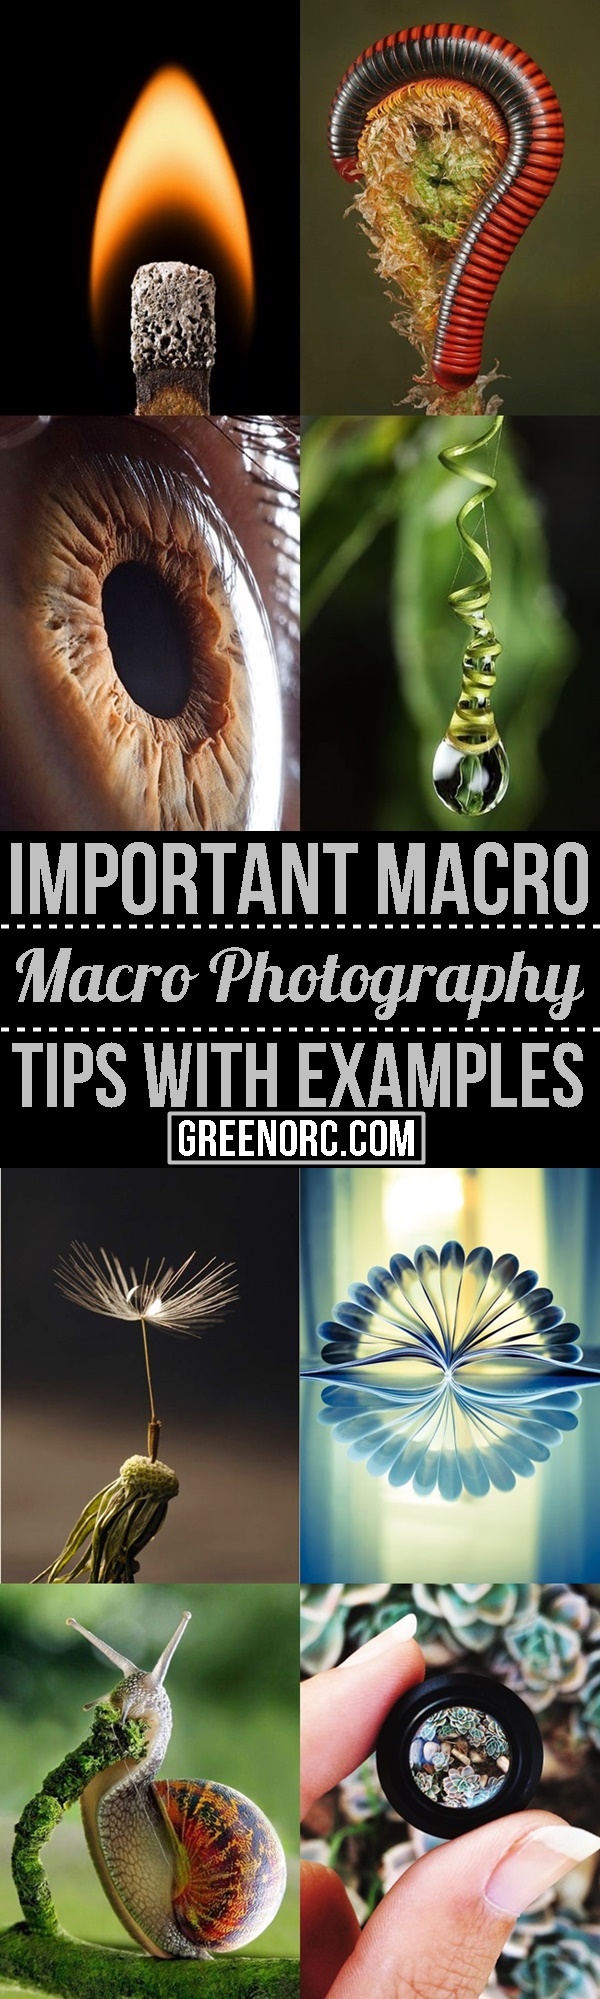 Important Macro Photography Tips With Examples